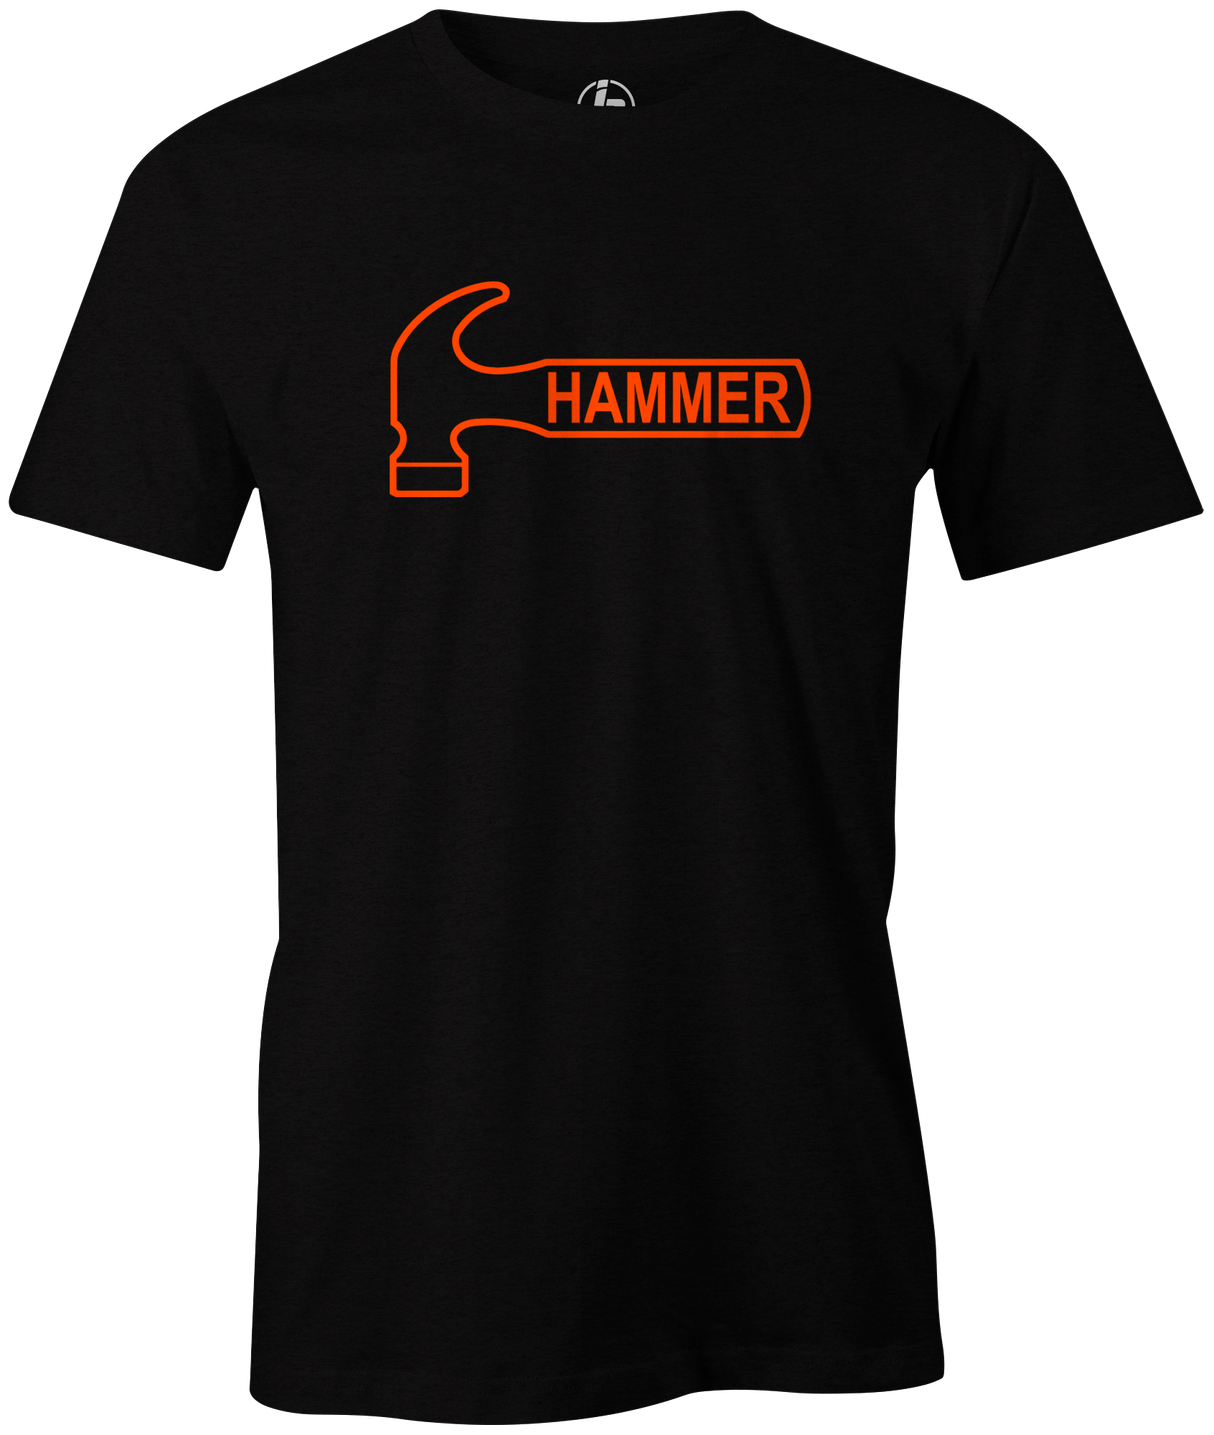 It's Hammer Time! Wear this iconic logo with pride. This tee features Hammer's orange logo. Bill o'neill. This is the perfect gift for any Hammer bowling fan or avid bowler! Grab this awesome t-shirt and be a part of the team!  Tshirt, tee, tee-shirt, tee shirt, Pro shop. League bowling team shirt. PBA. PWBA. USBC. Junior Gold. Youth bowling. Tournament t-shirt. Men's. Bowling ball. Black widow. Purple Hammer.